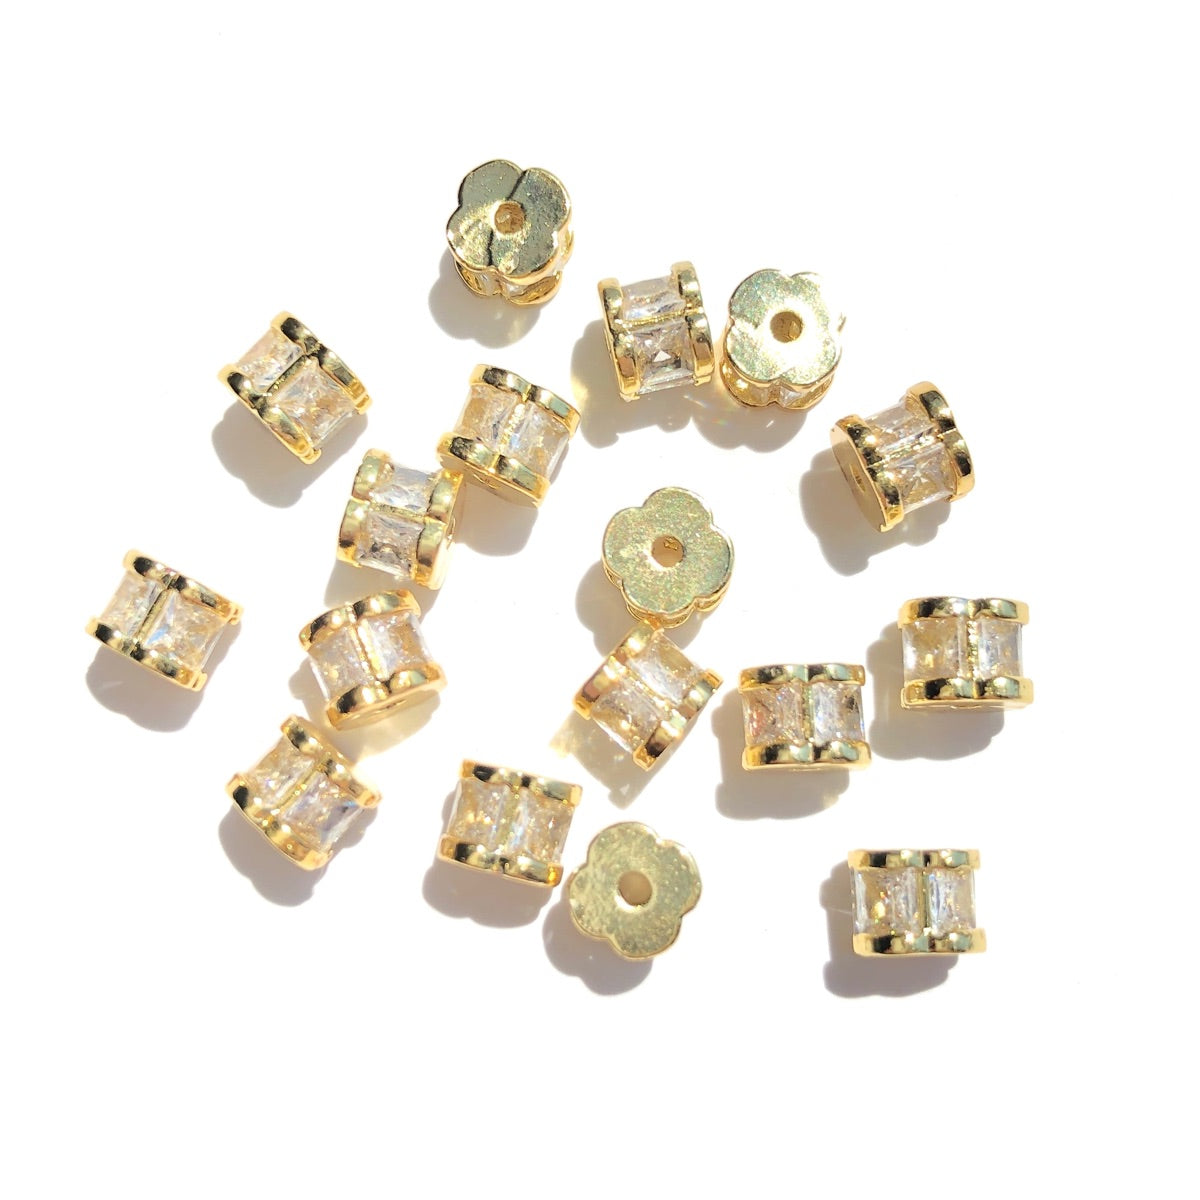 20-50pcs/lot Rectangle CZ Paved Flower Spacers Gold CZ Paved Spacers New Spacers Arrivals Rondelle Beads Wholesale Charms Beads Beyond